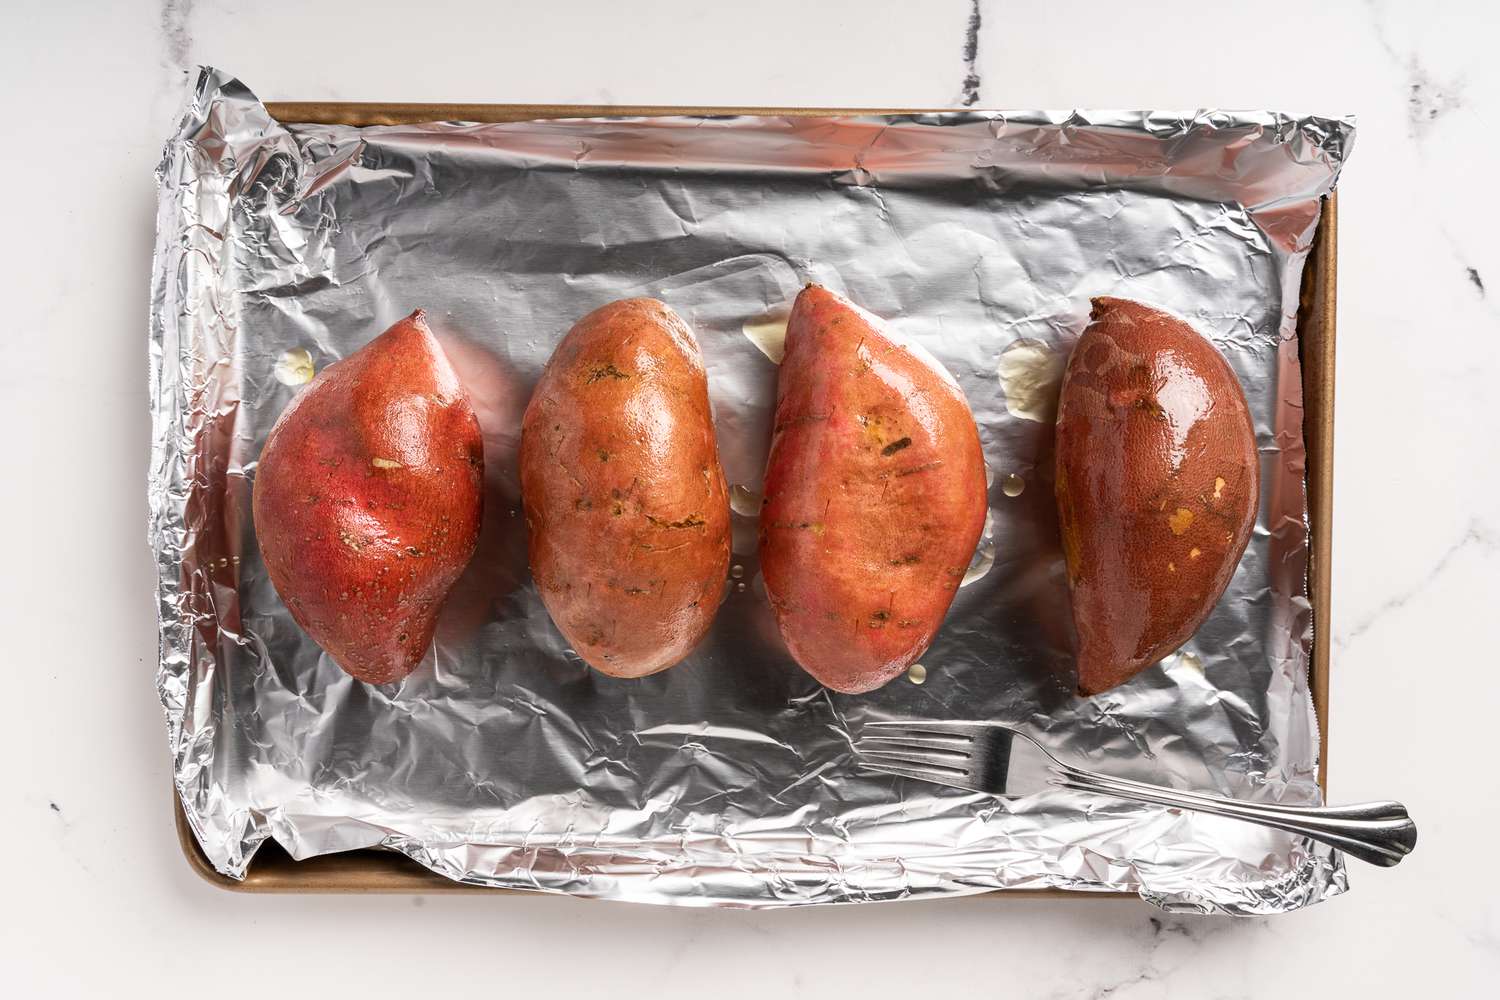 How To Bake A Sweet Potato In Foil At 350 - Recipes.net